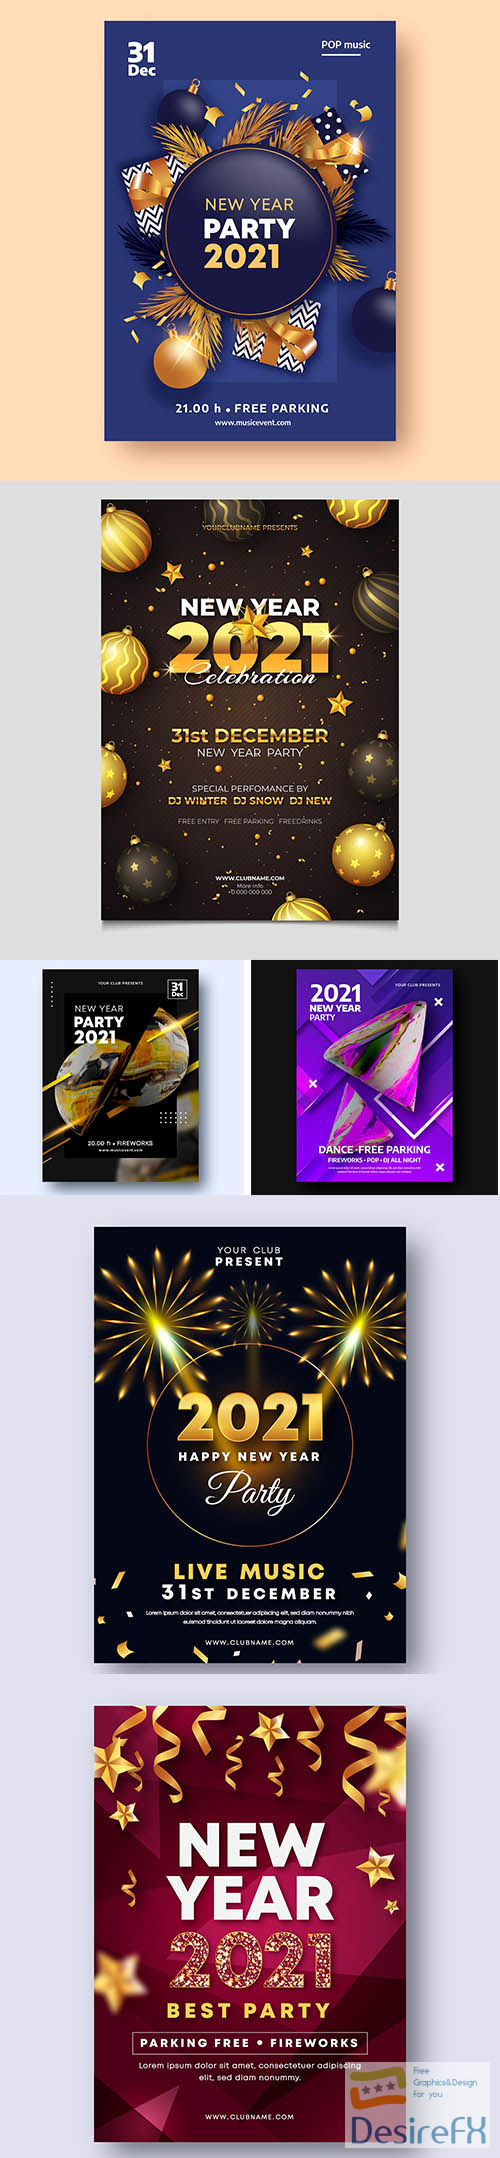 Realistic new year 2021 party flyer template